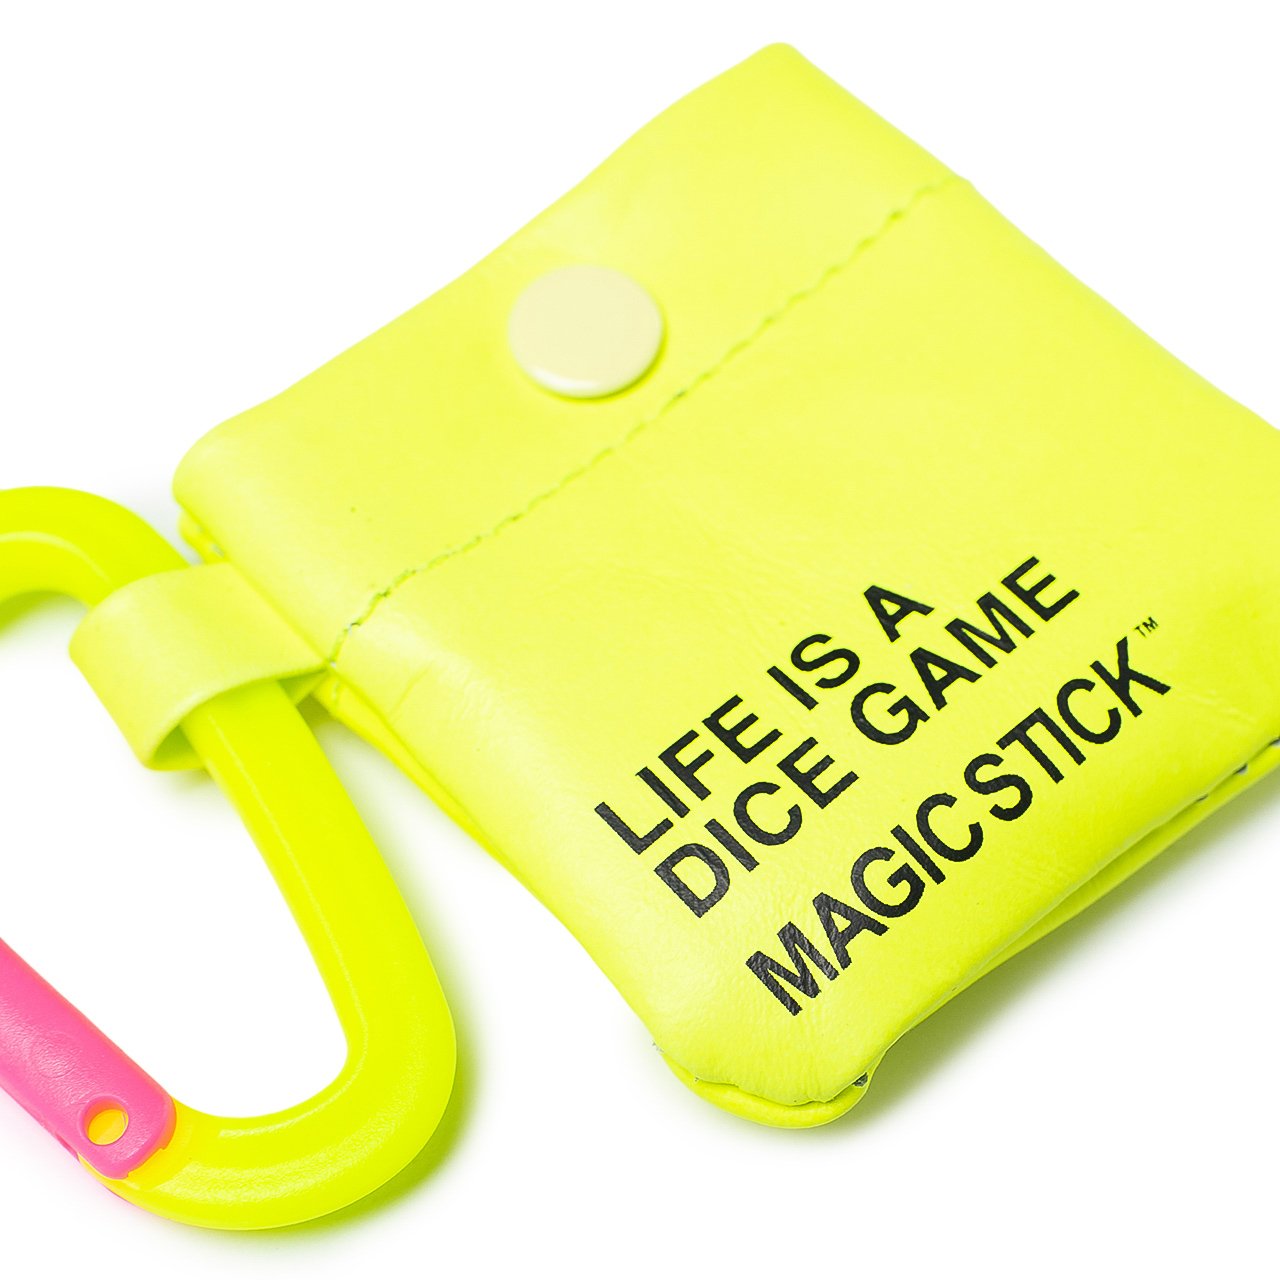 magic stick travel chinkoro pouch with dice (volt yellow) - 19ss-ms7-015 - a.plus - Image - 2